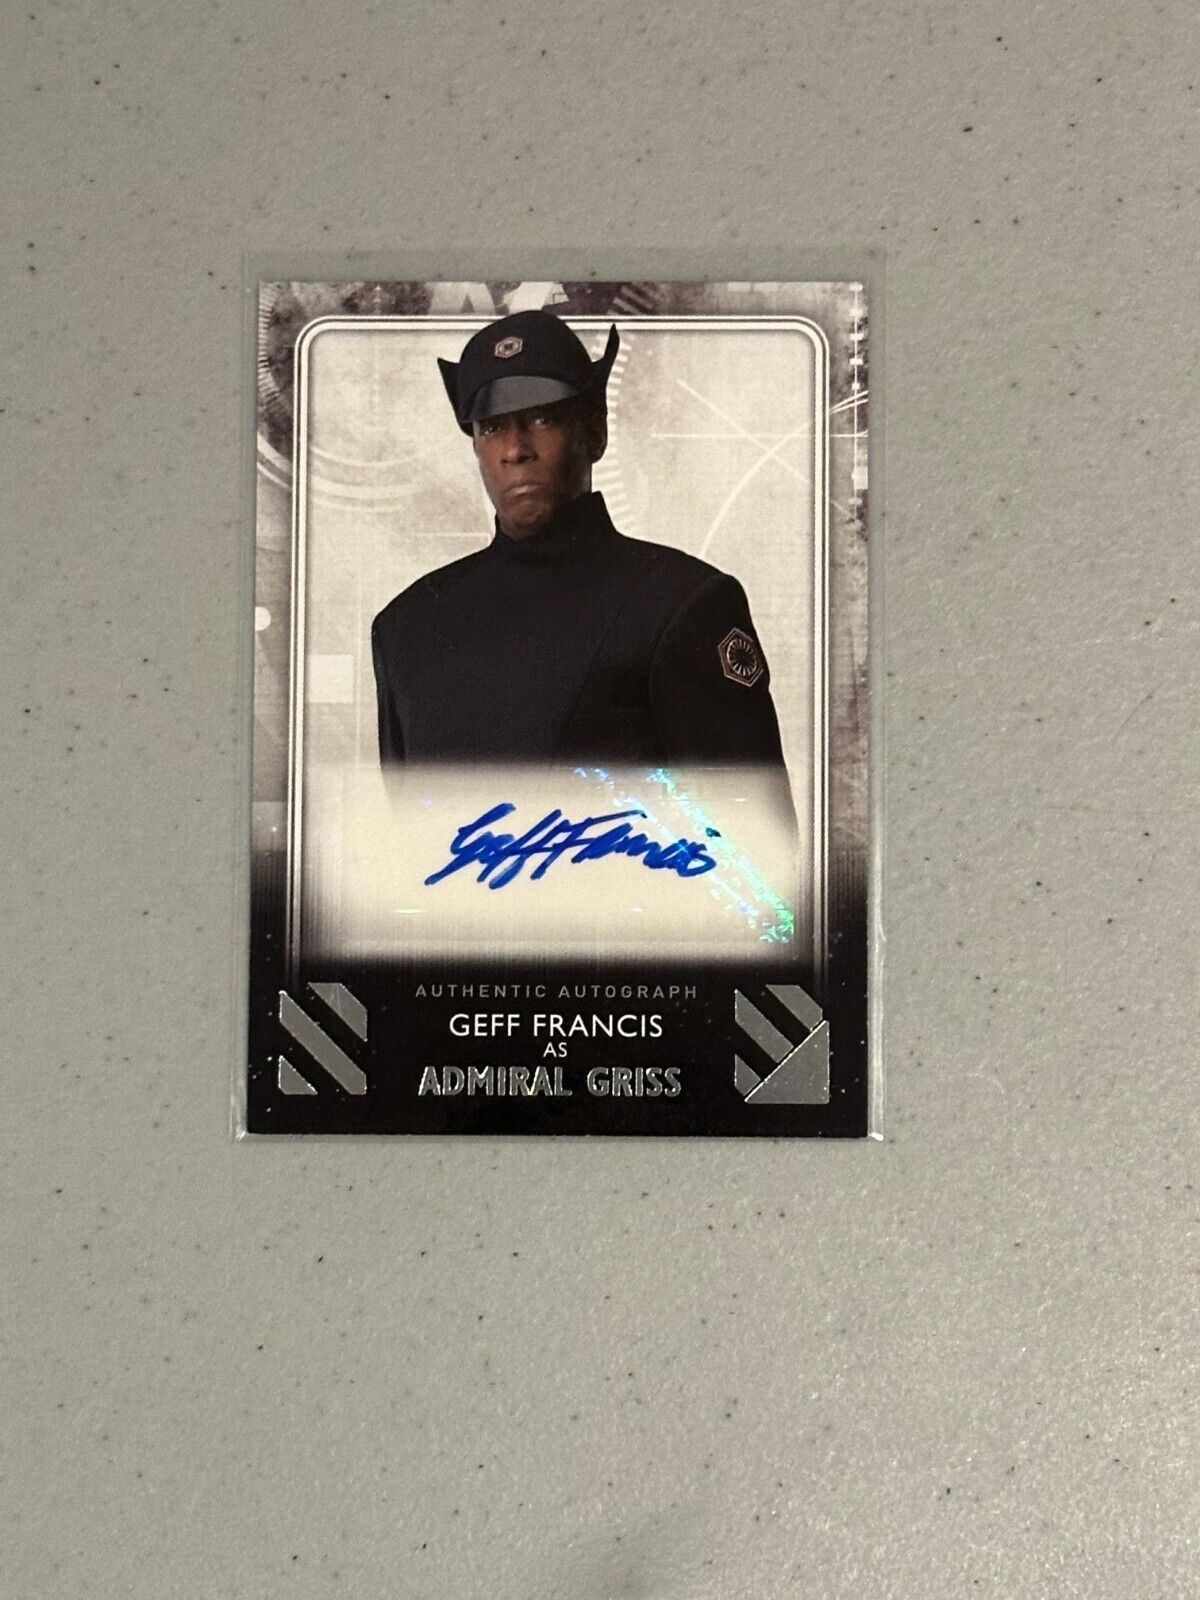 2020 Topps Star Wars The Rise of Skywalker S2 - Auto Admiral Gris - Geff Francis